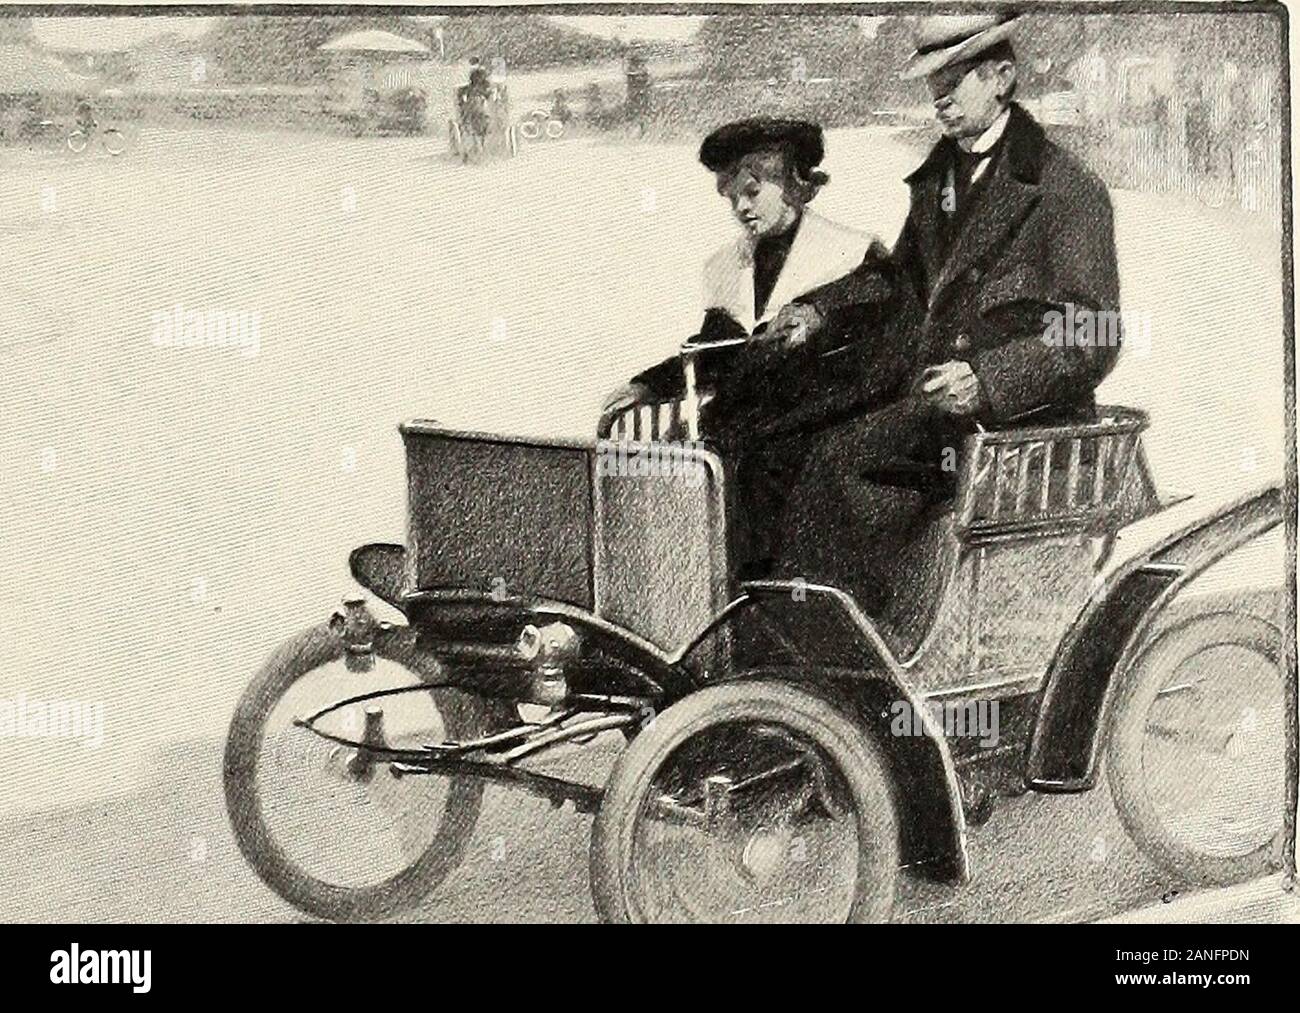 StNicholas [serial] . LONG-DISTANCE GASOLENE RACER (FRENCH). 1900. the automobile: its present and its future. 3%3 travel on our roads and carry passengers and The seat is in front, and there is a closed and baggage. Such carriages would hardly work covered box behind and under the seat. Take at all on our bad roads, and it is hard to see a seat, please, on the right, while I turn this what fun there would be riding on a steam- crank. Dont be alarmed ; she will not start, roller. The old steam-carriages failed and This crank fits into a socket in the side of the were abandoned because they wer Stock Photo